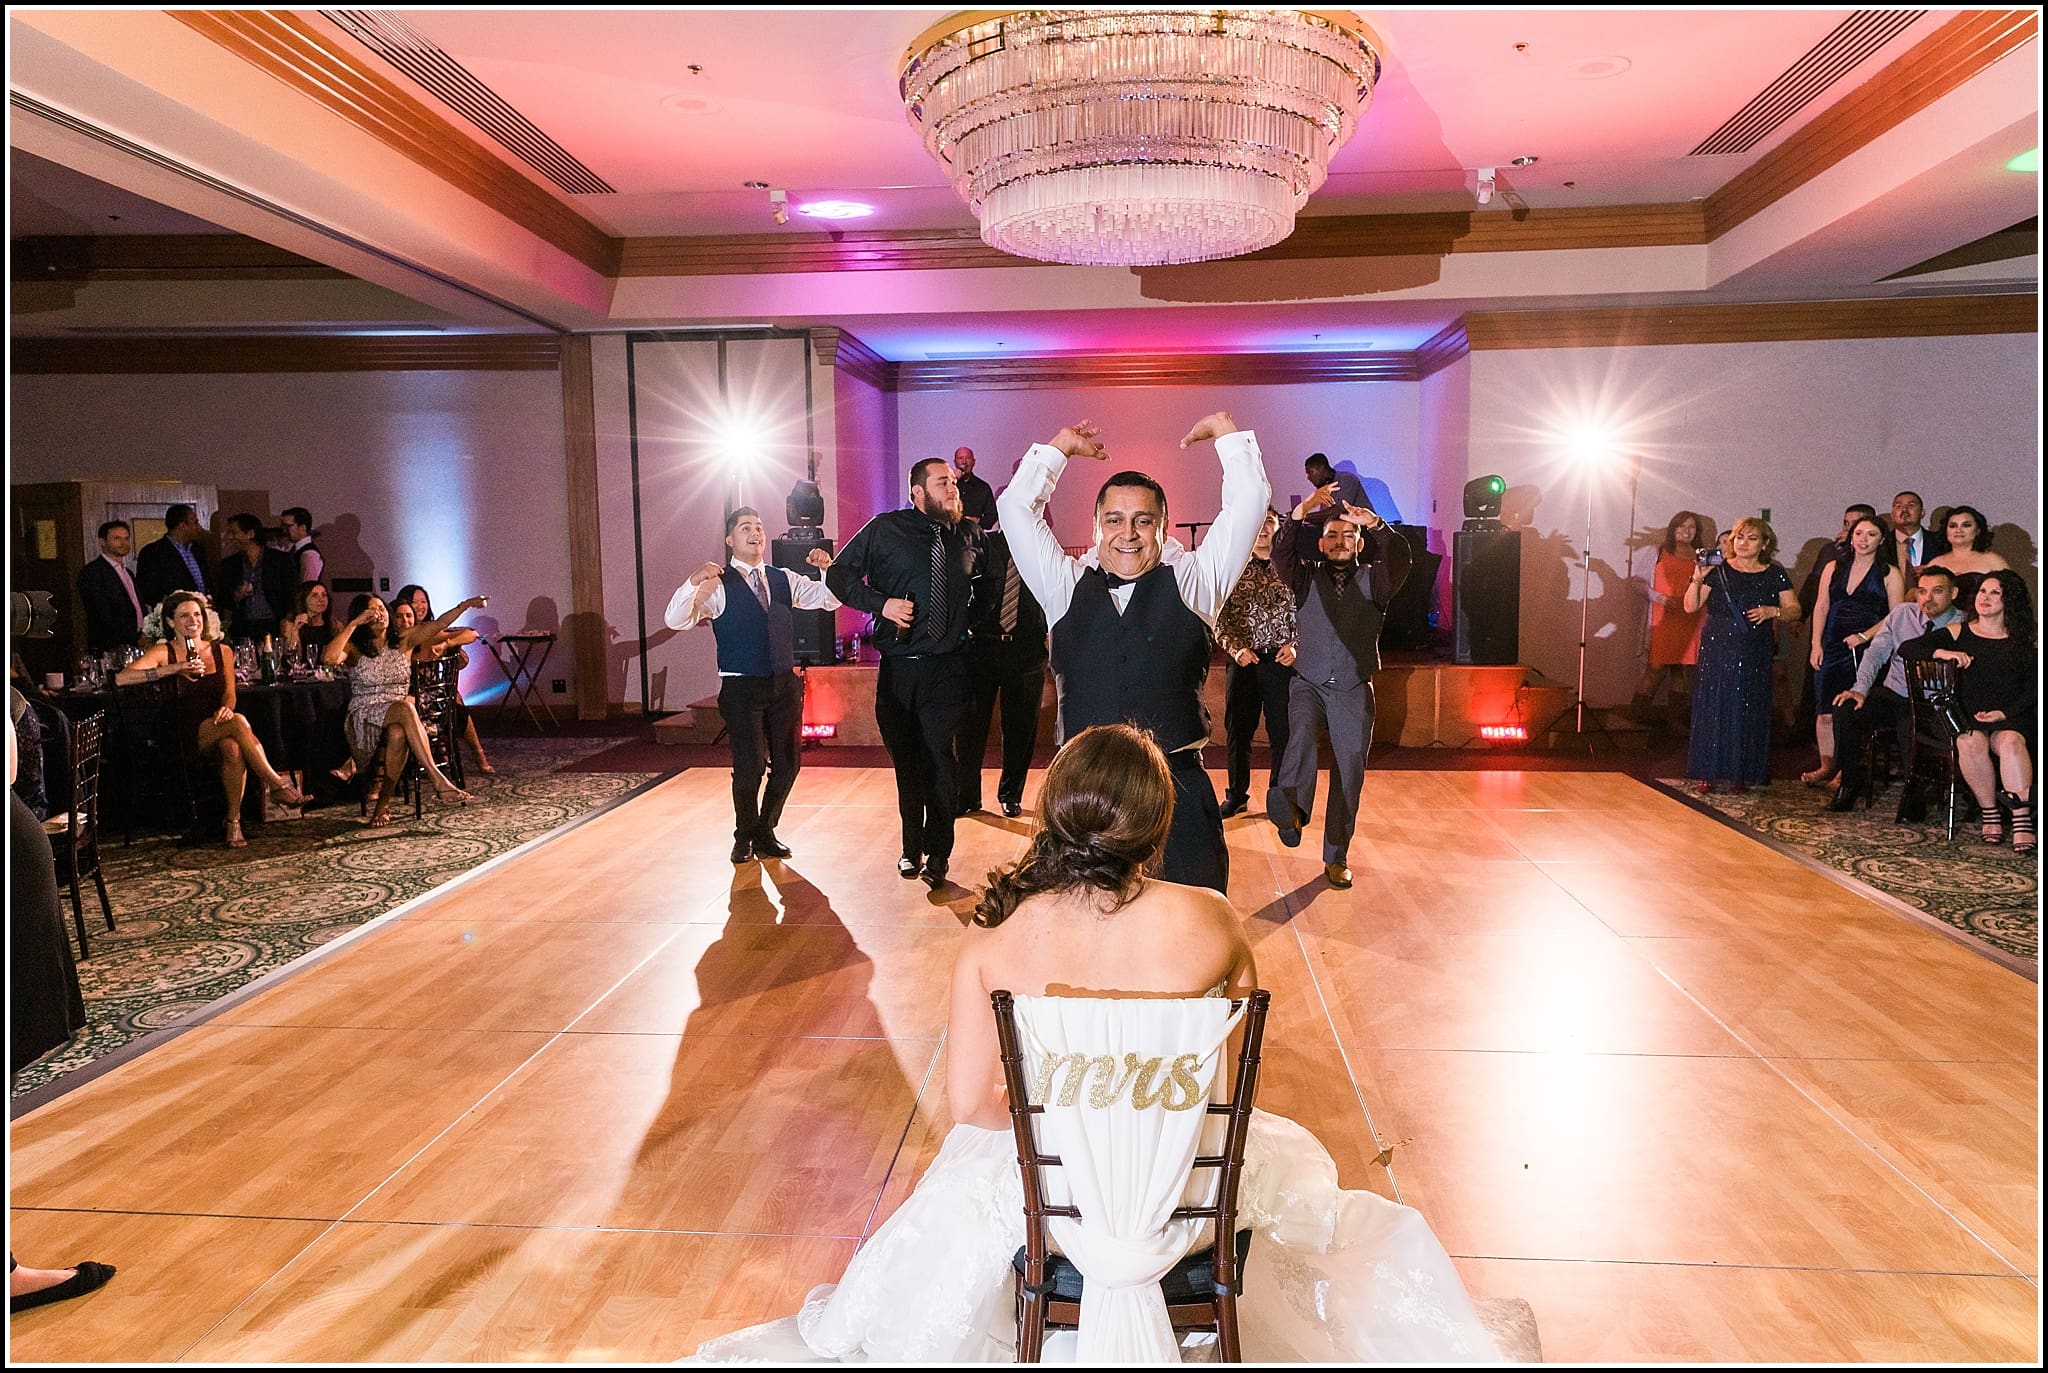  favorite wedding images 2016, wedding photos from 2016, our favorite wedding photos, indian wells country club wedding, country club wedding, garter toss, ocf wedding reception